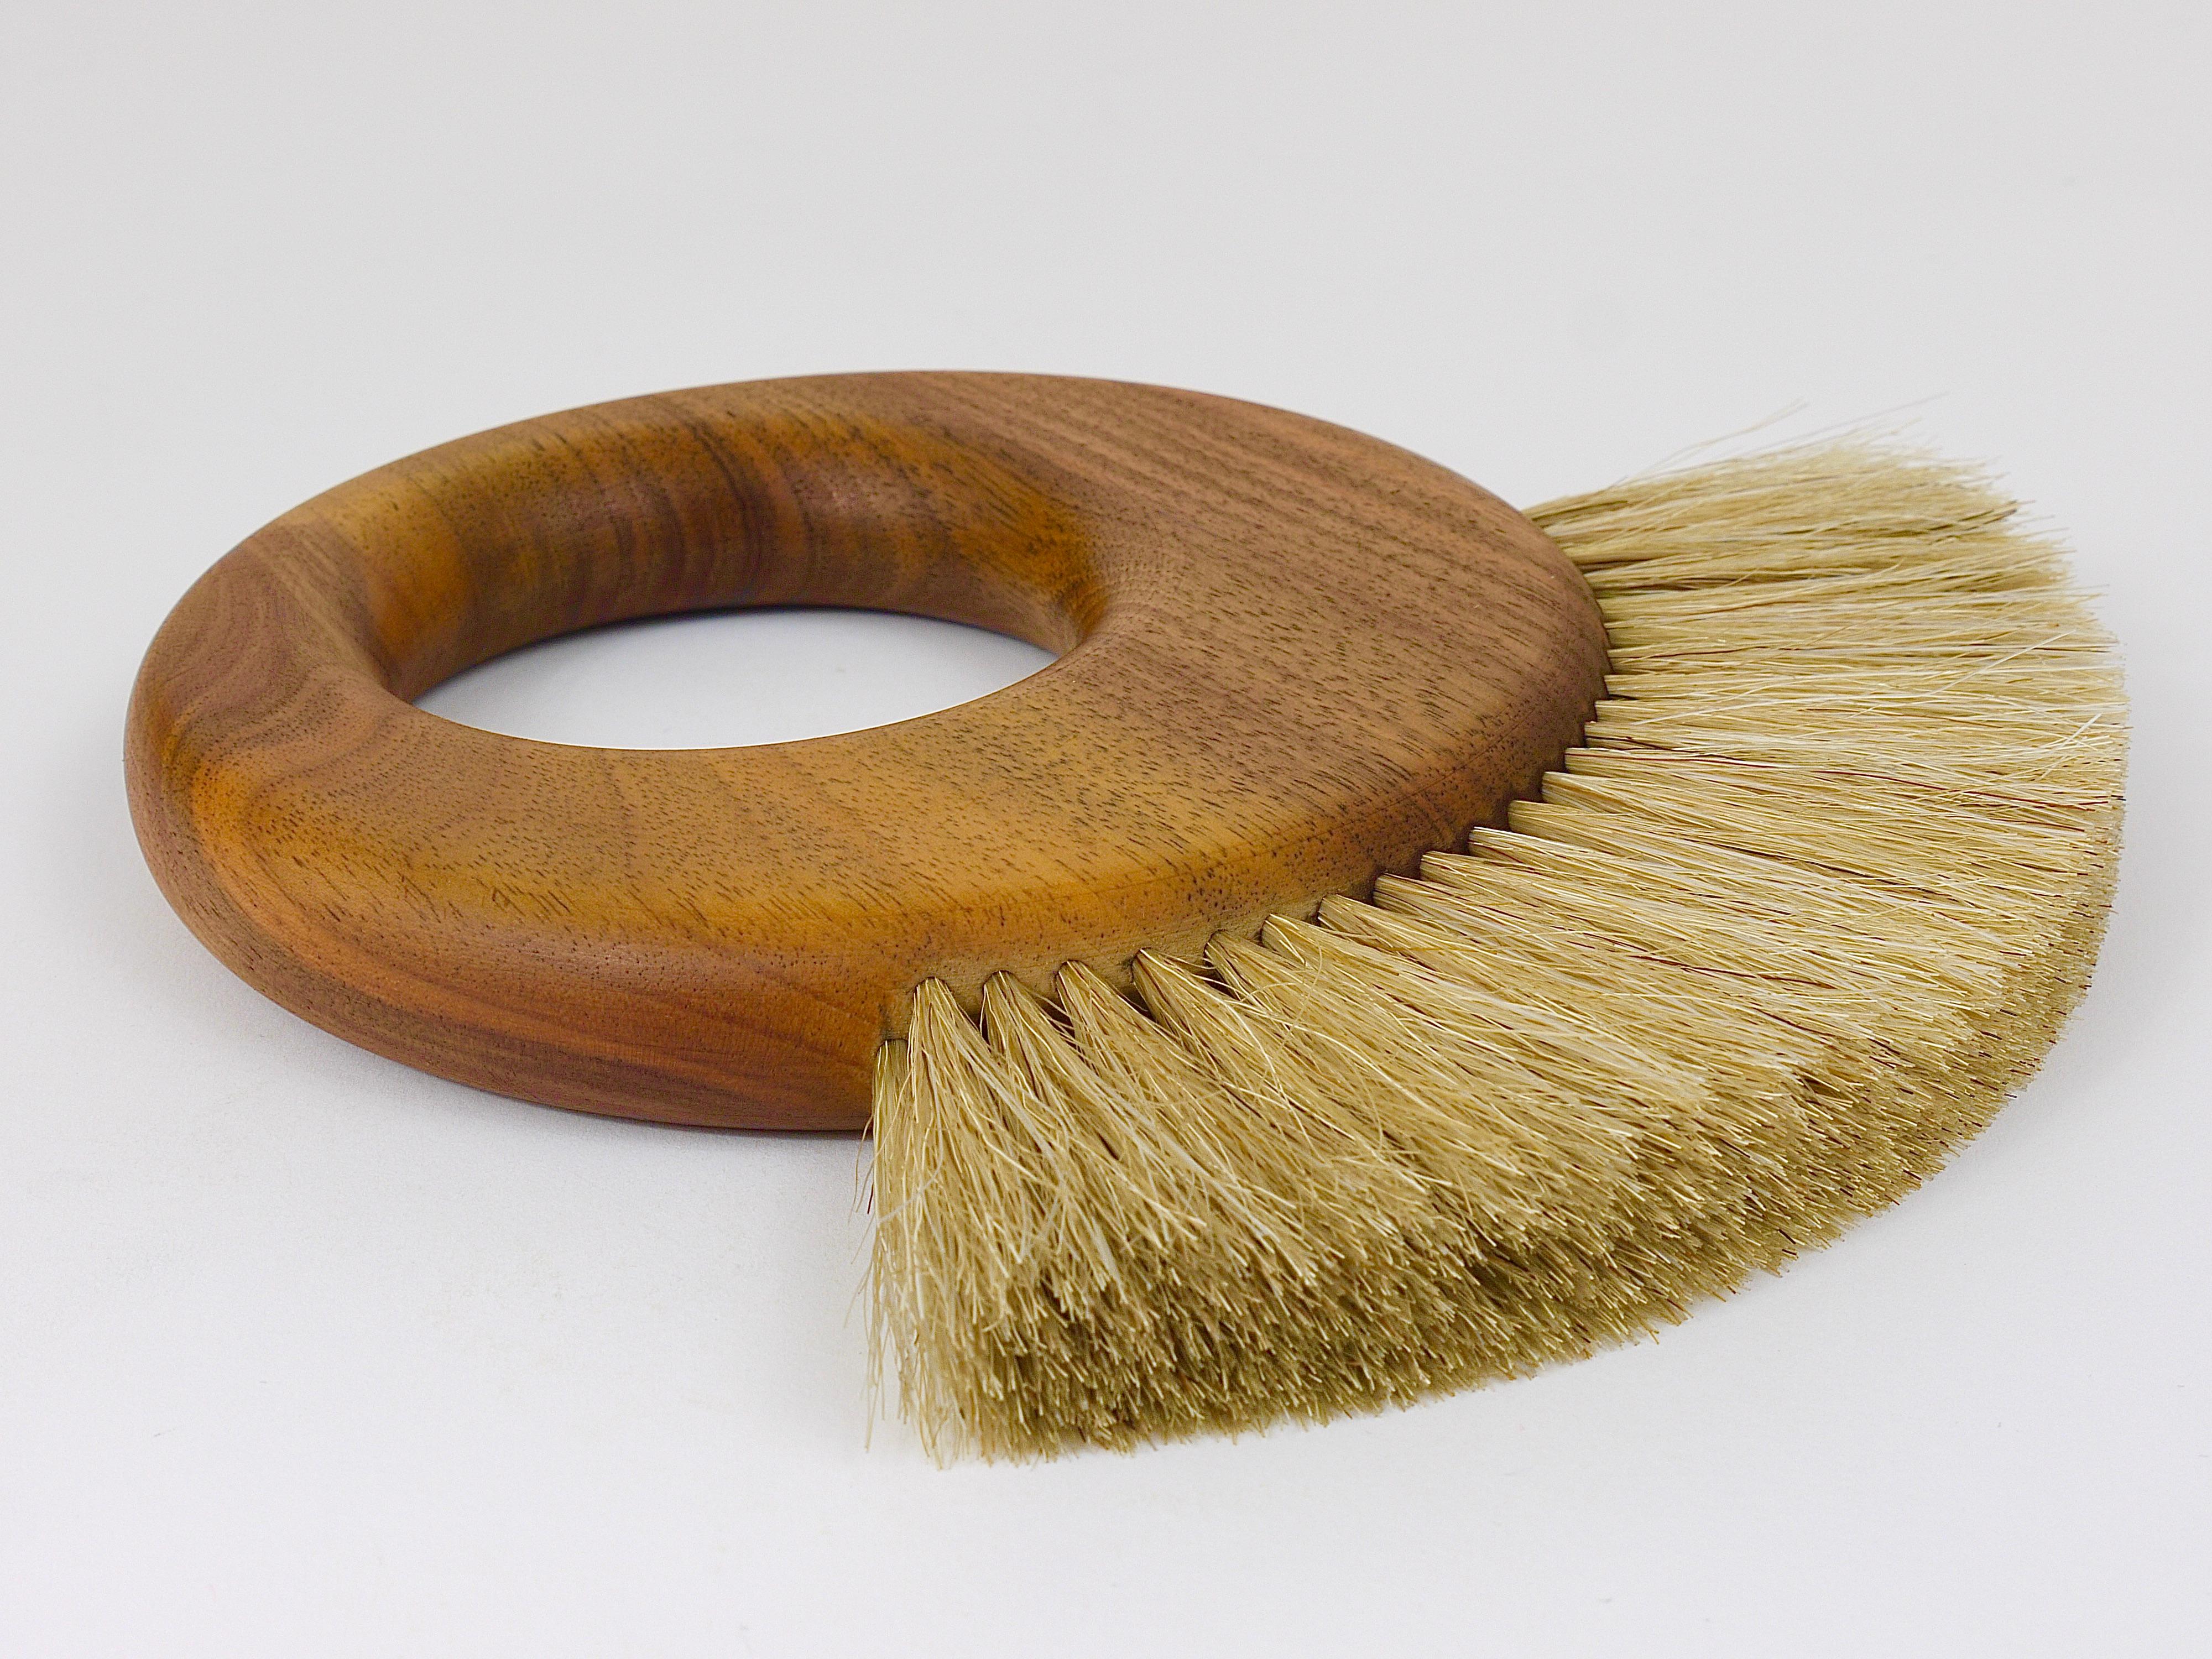 Large Carl Aubock Midcentury Walnut Ring Clothes Brush, Austria, 1950s For Sale 7